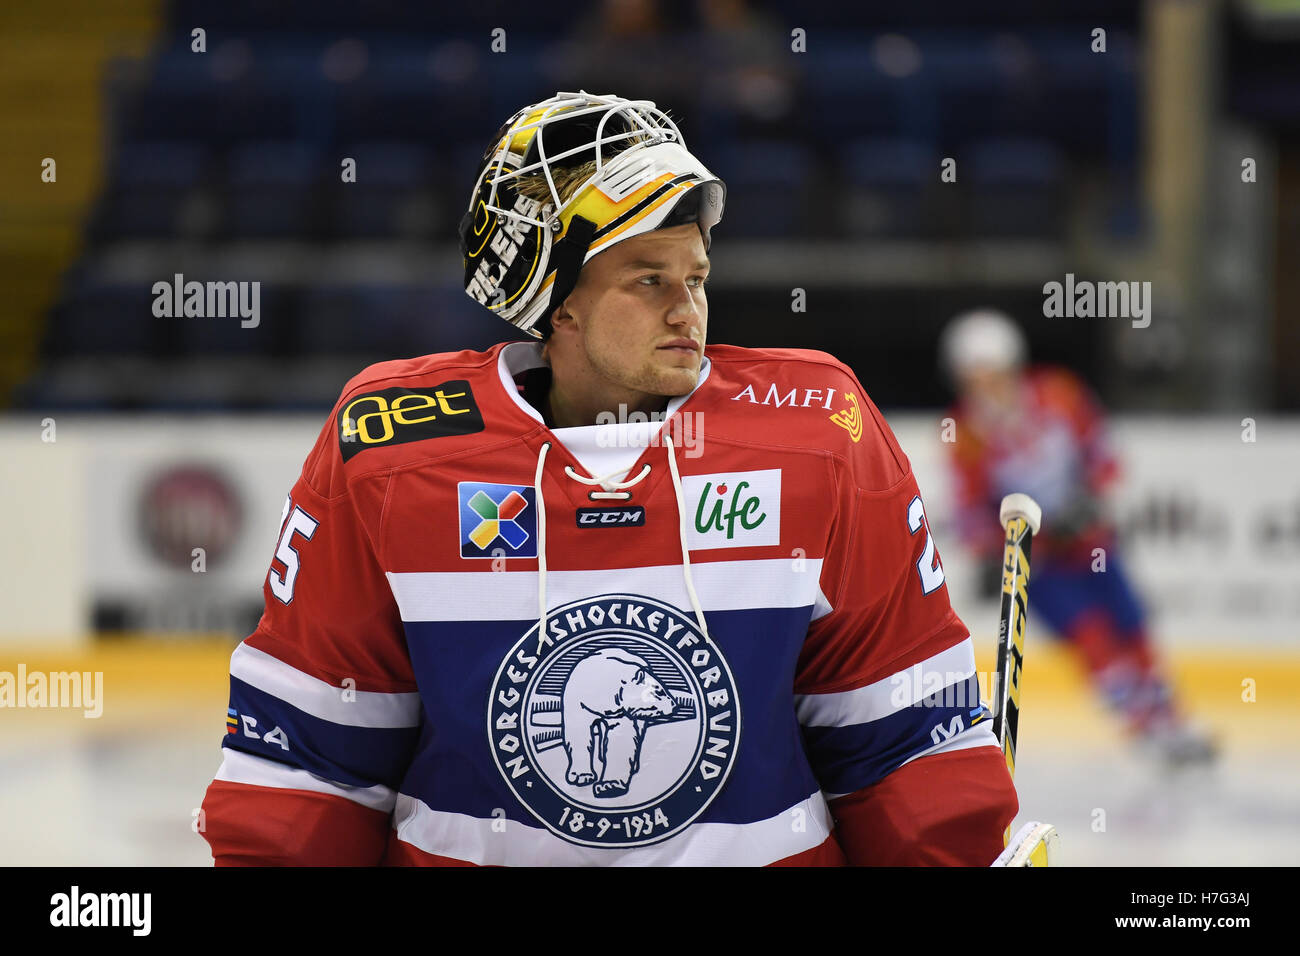 Henrik Holm of the Stavanger Oilers on international duty with Team Norway during the international series v Team GB. Stock Photo